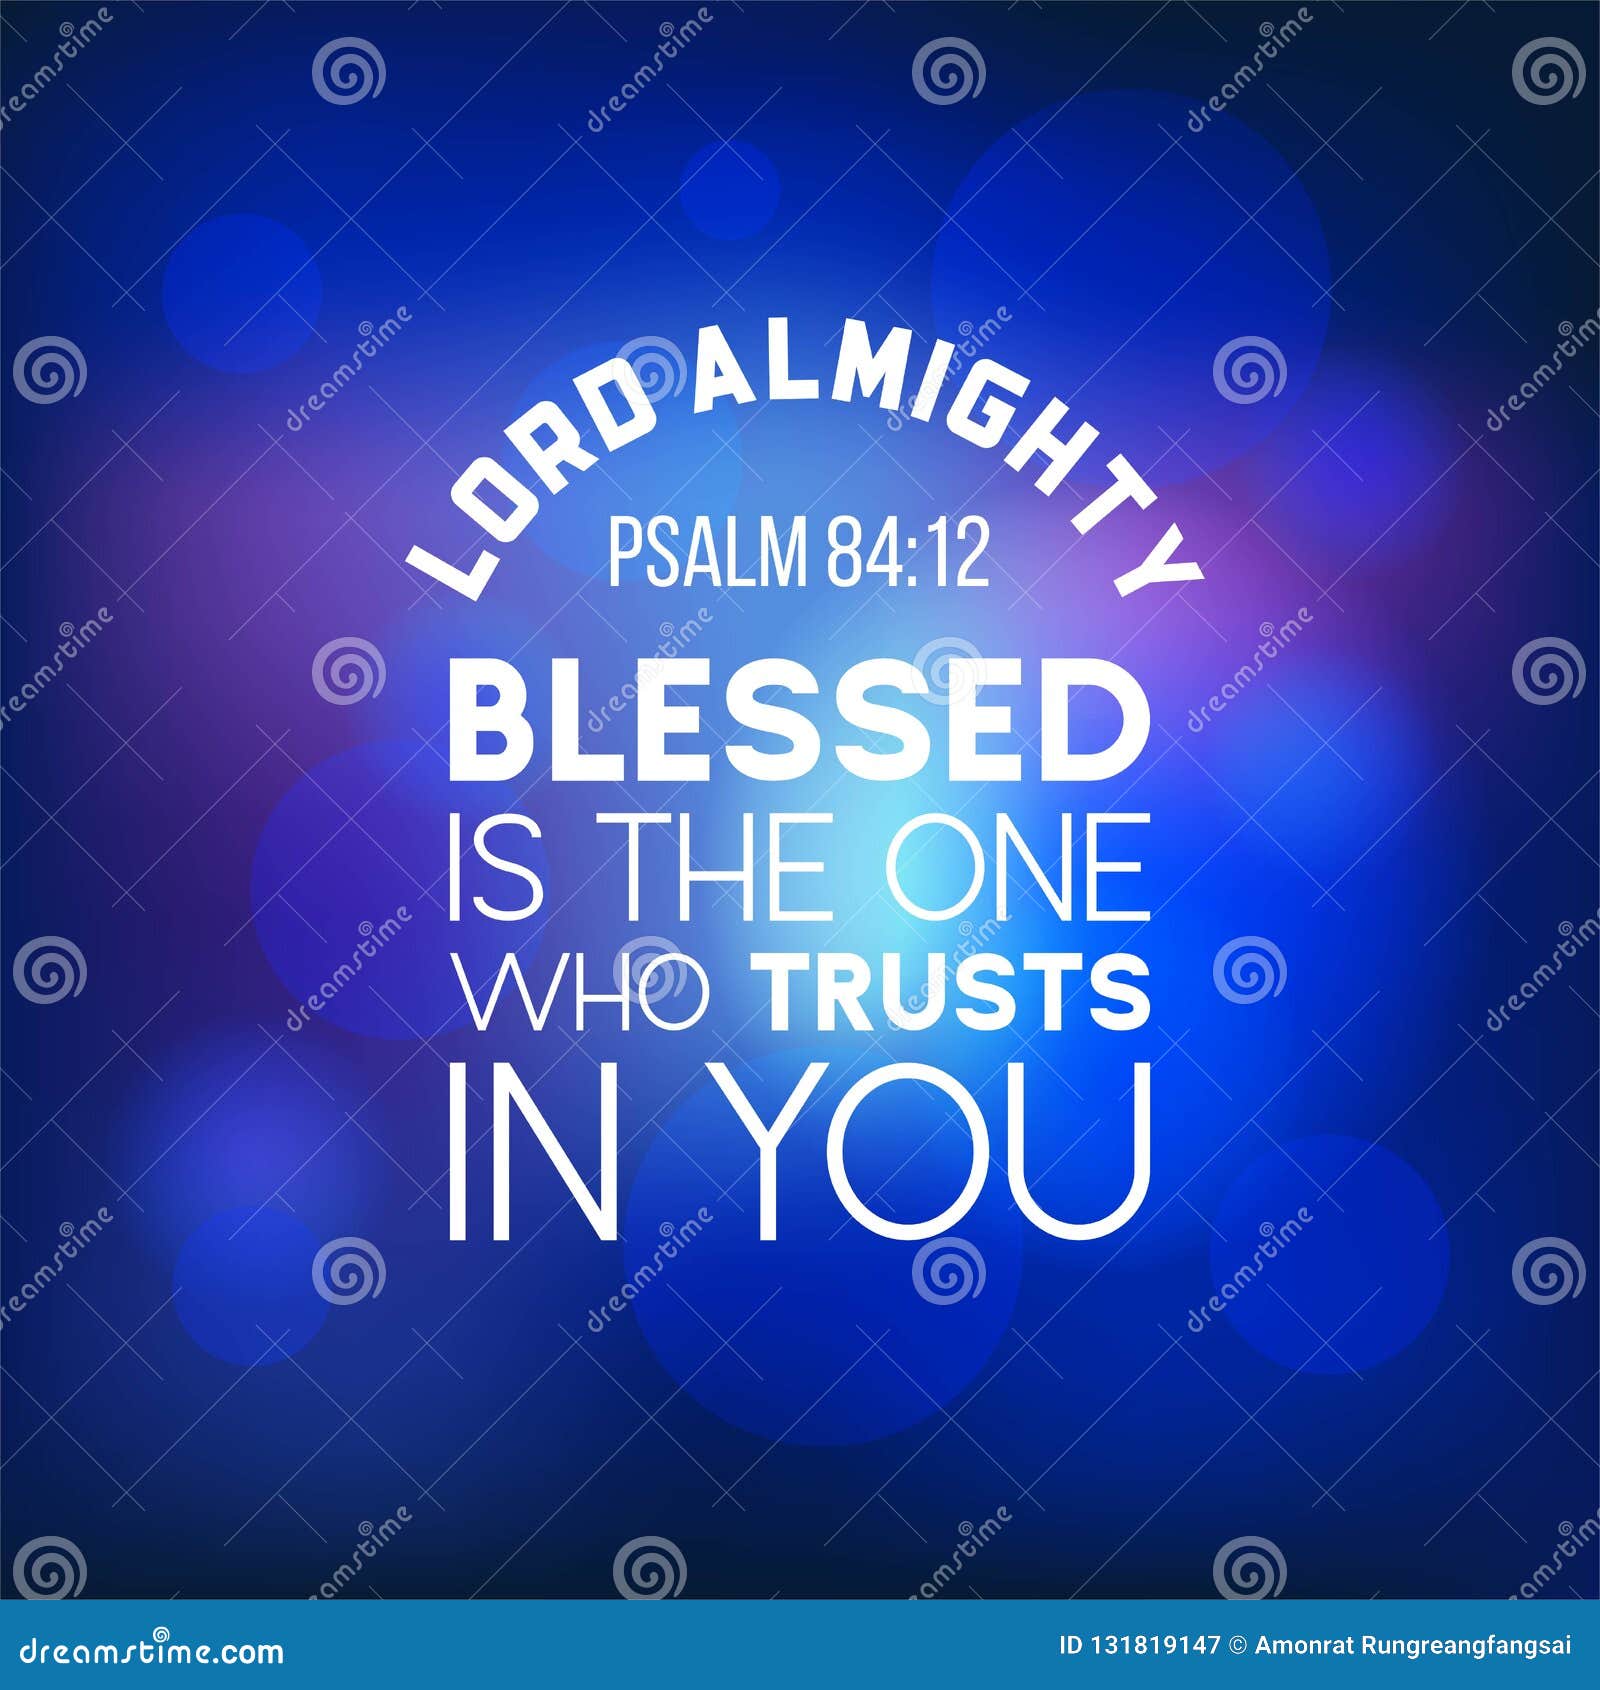 bible quote from psalm 84:12, lord almighty, blesses is the one